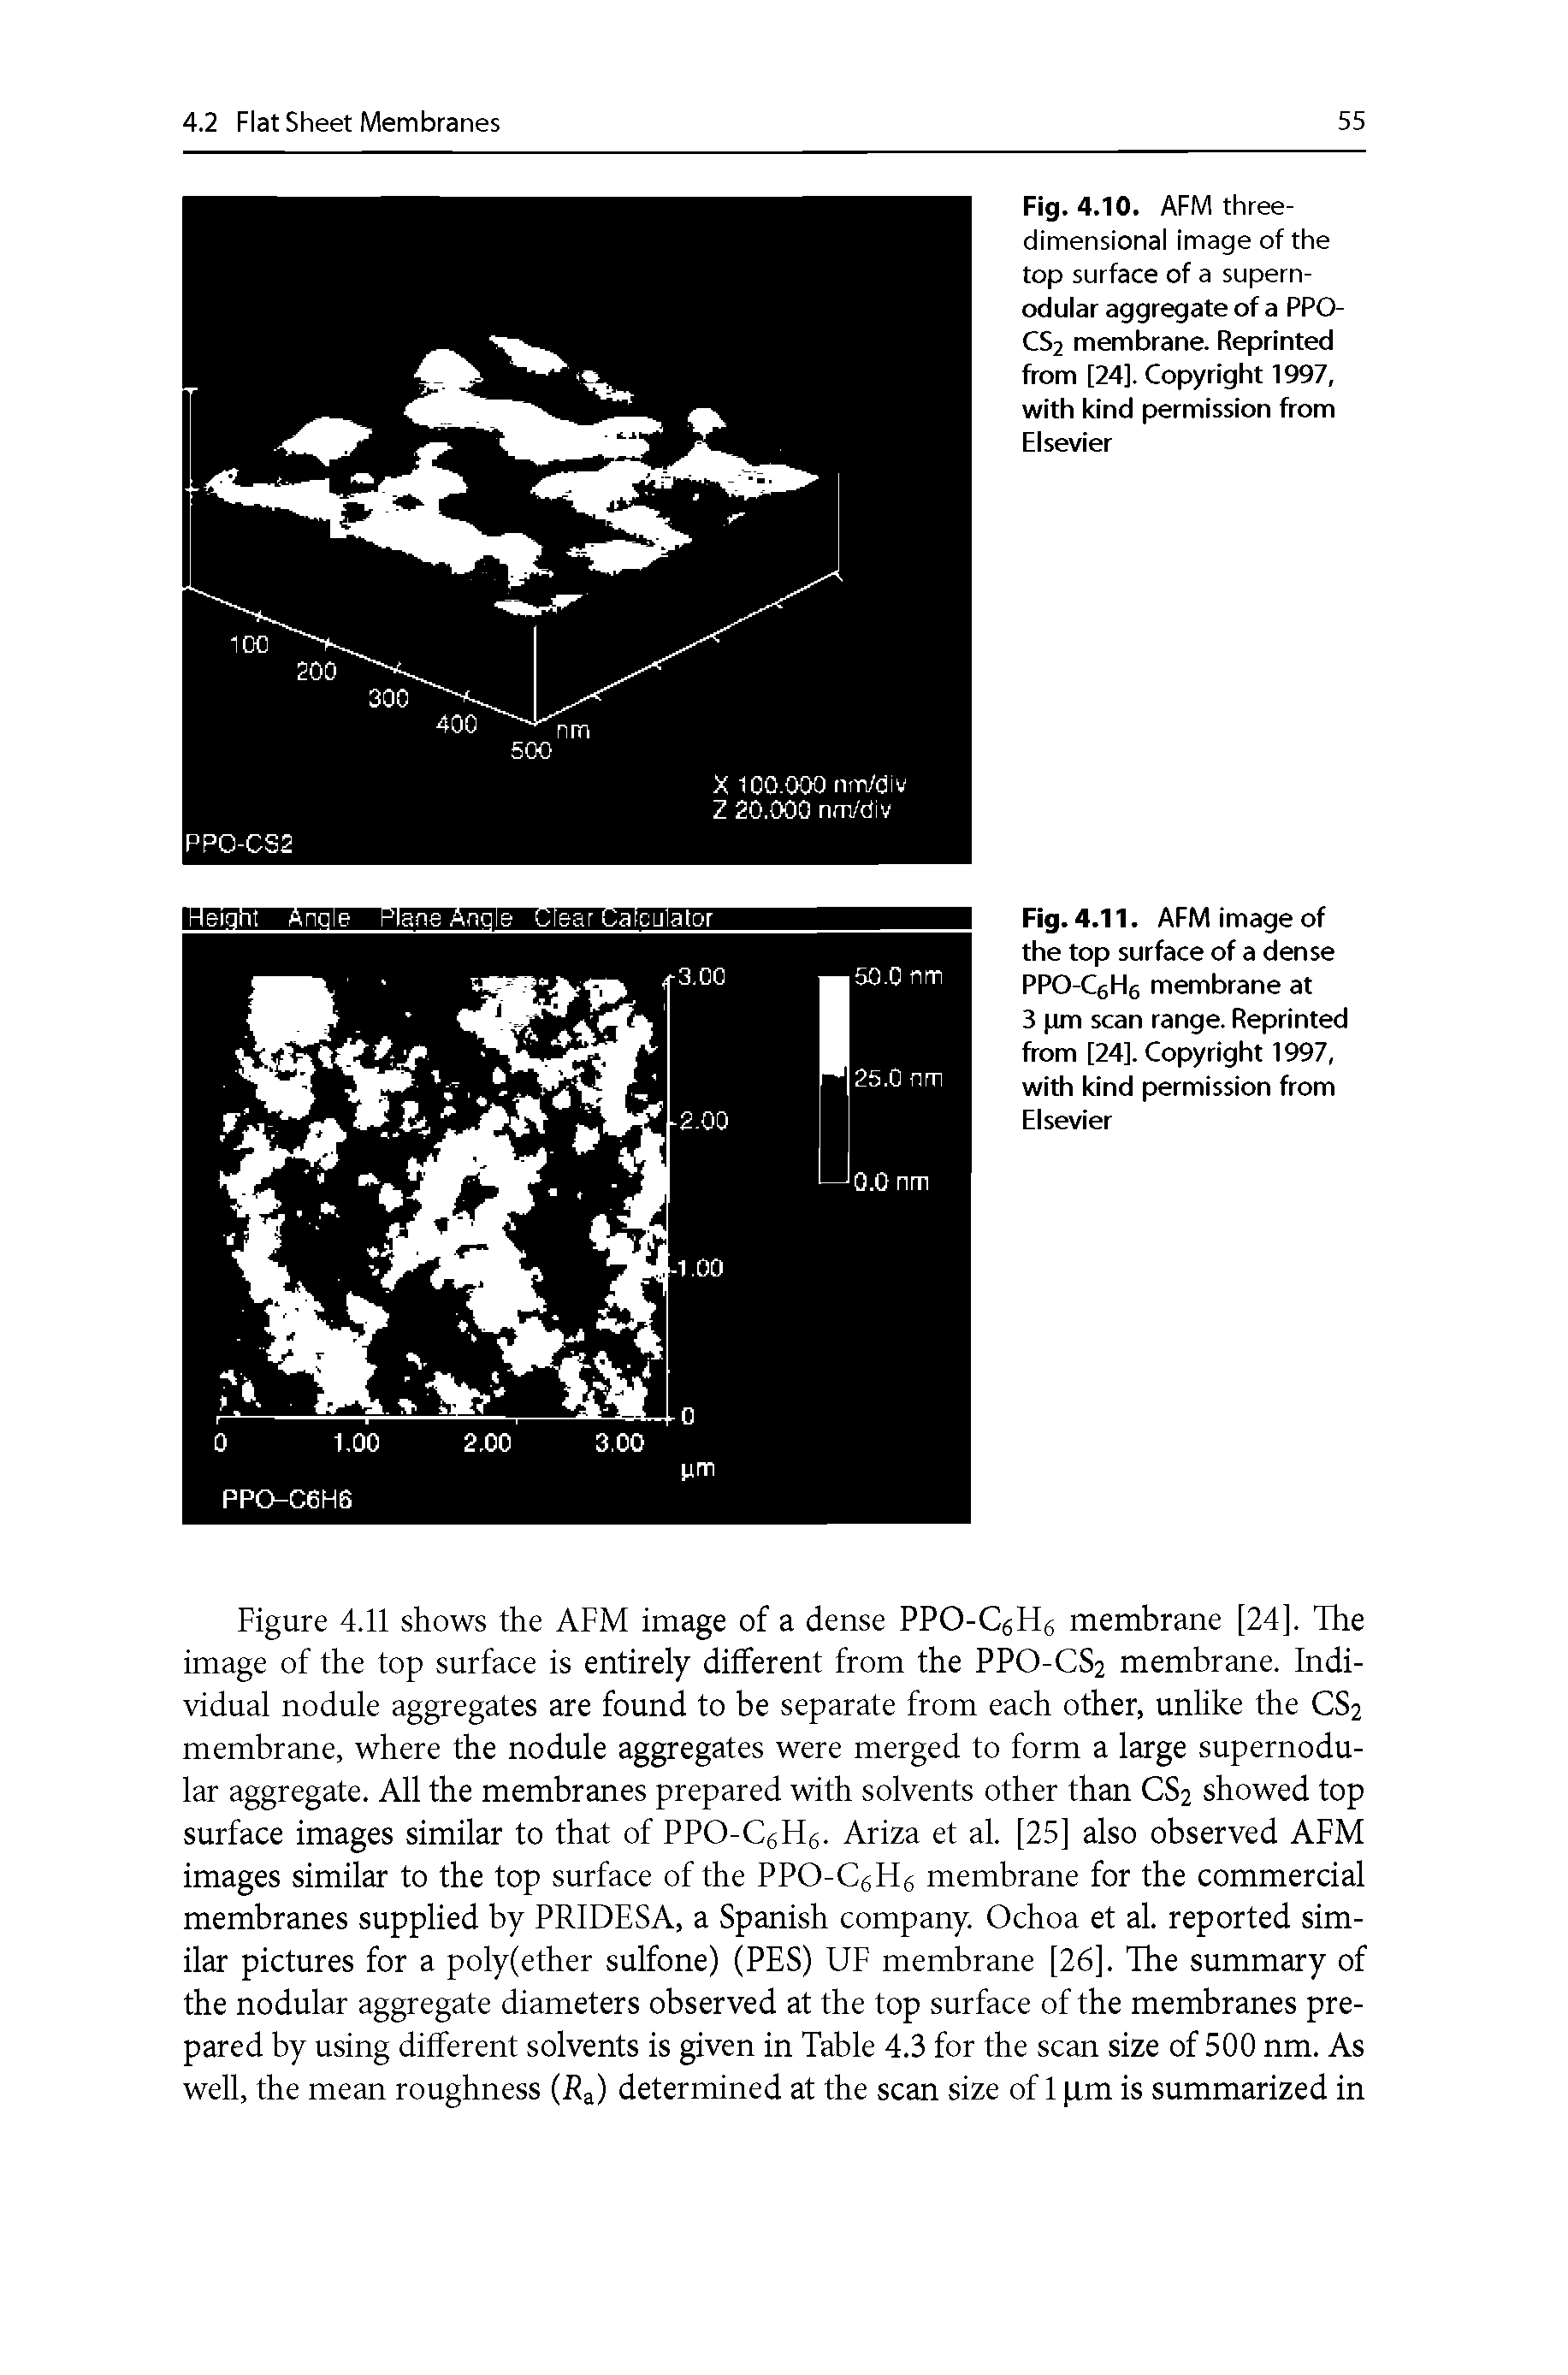 Fig. 4.10. AFM three-dimensional image of the top surface of a supern-odular aggregate of a PPO-CS2 membrane. Reprinted from [24]. Copyright 1997, with kind permission from Elsevier...